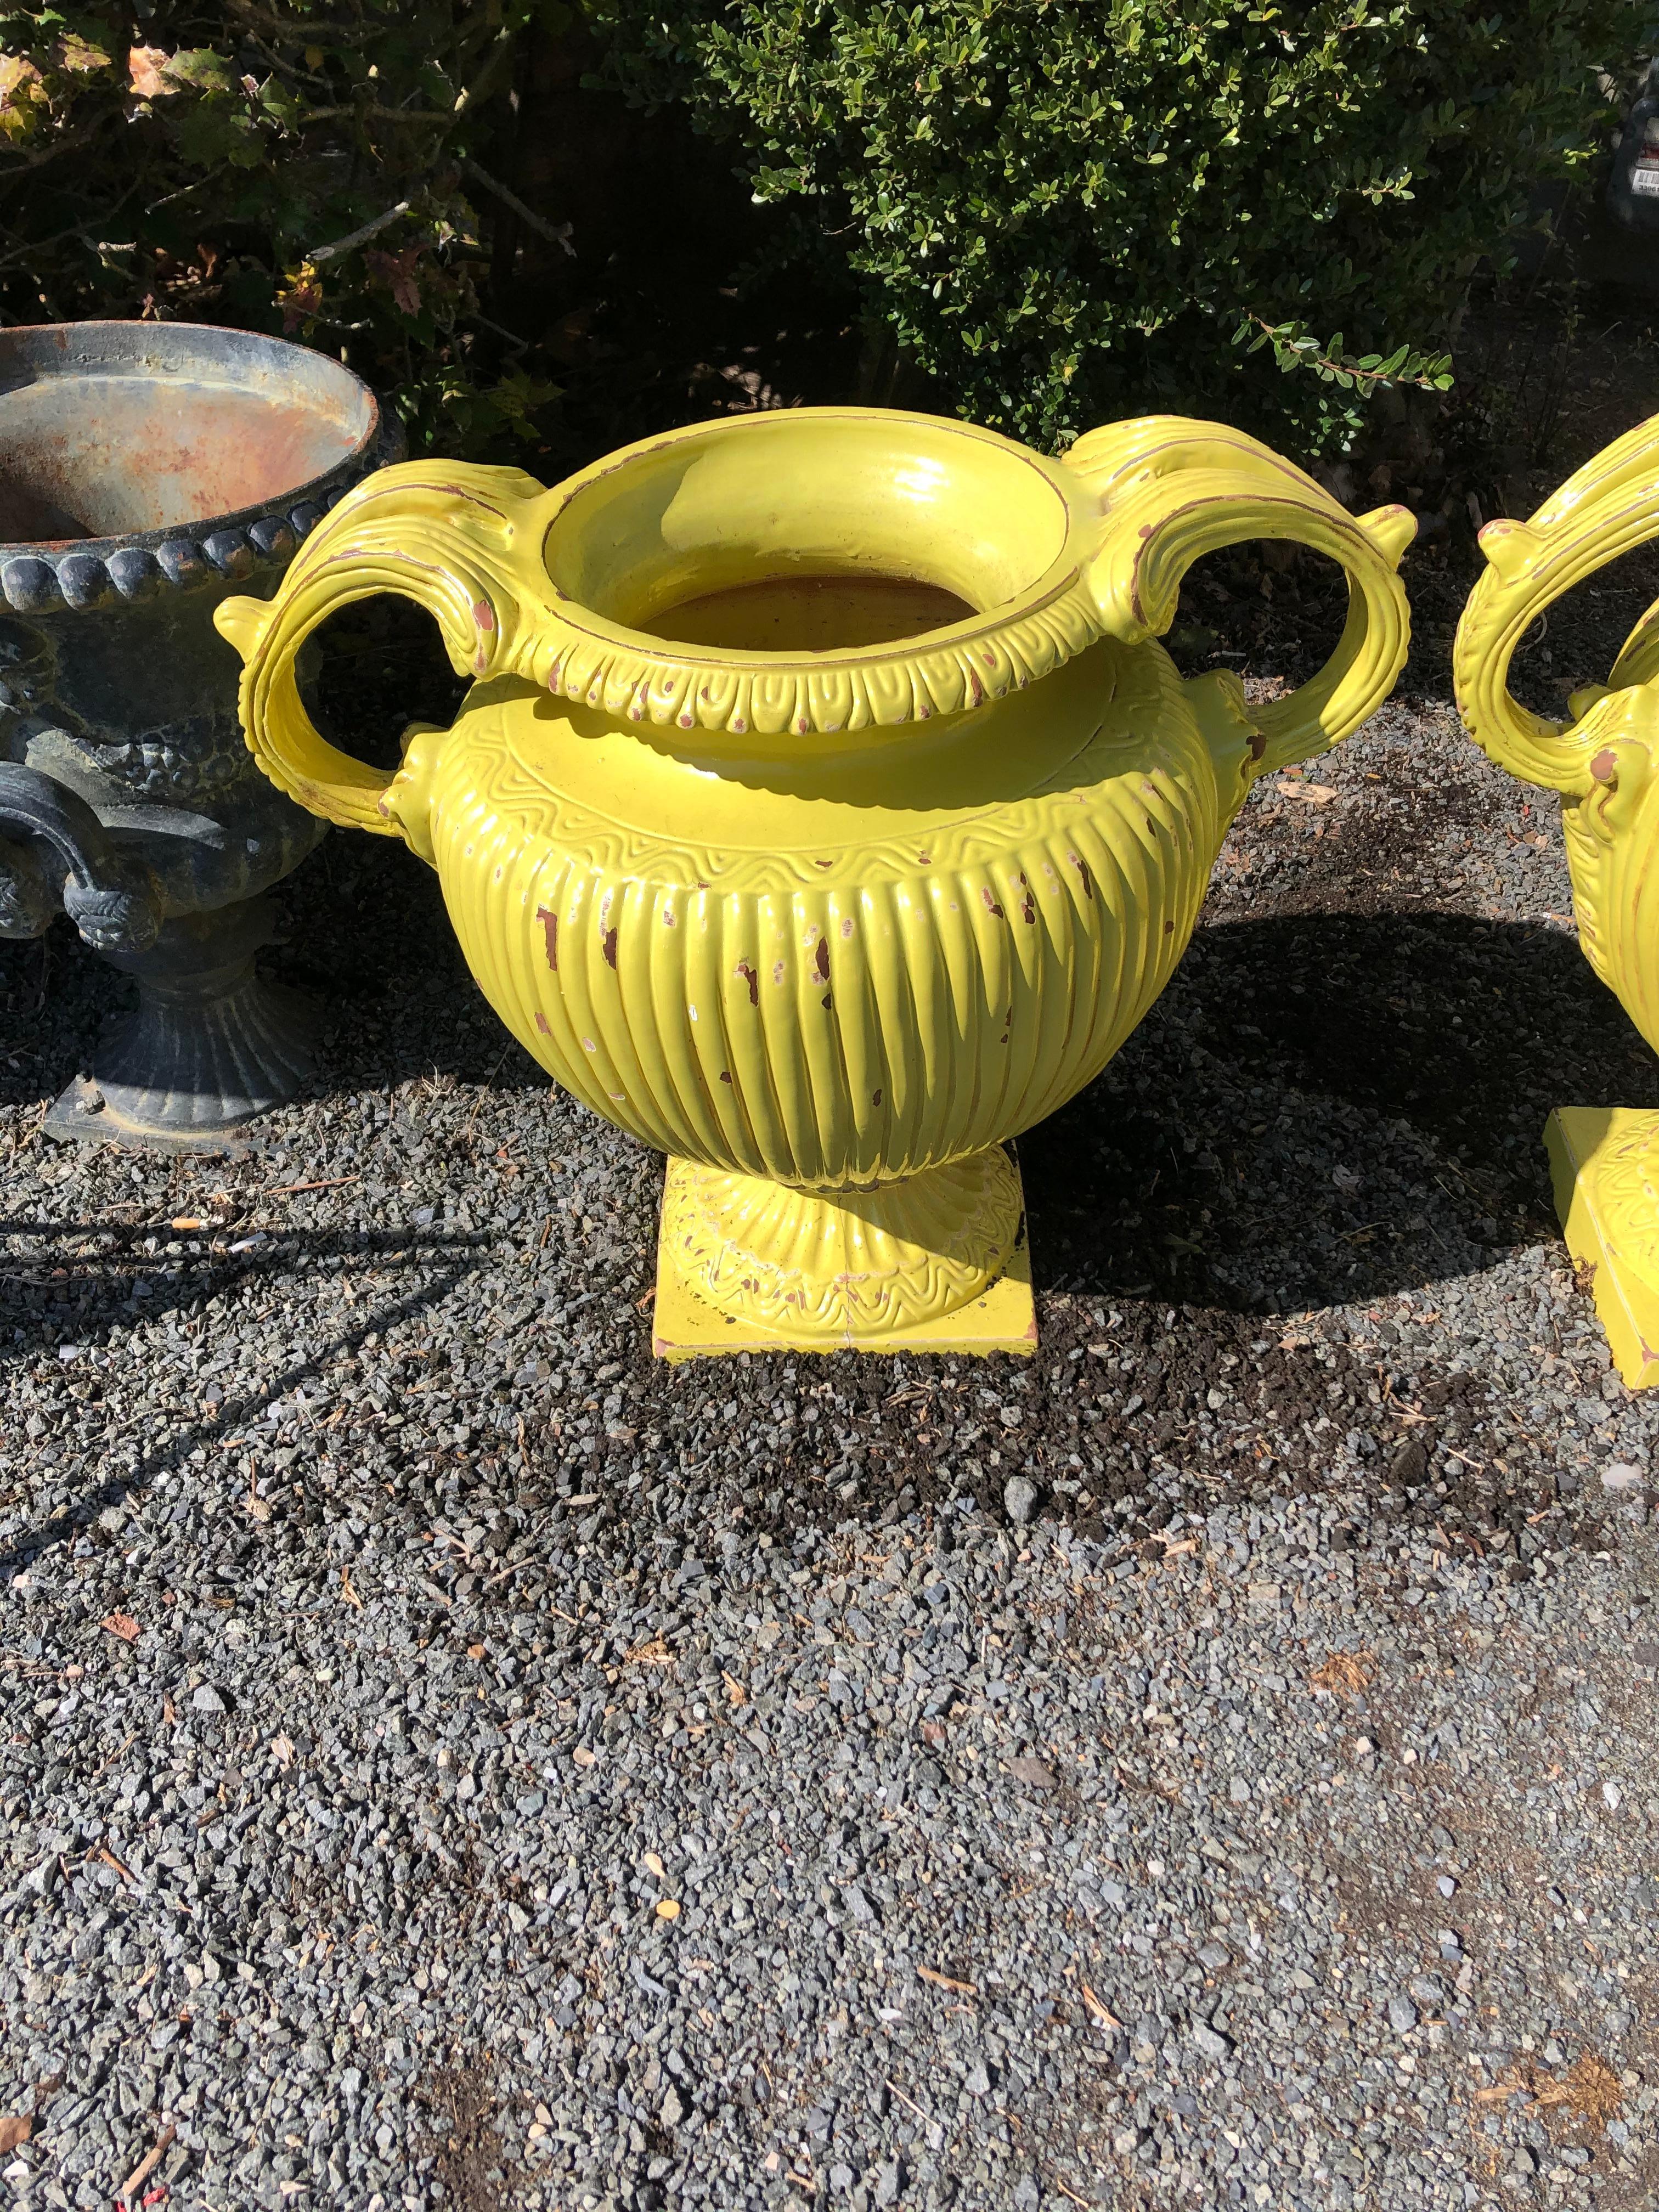 An eye poppingly chic pair of large heavy Italian vintage ceramic urn planters having neoclassical style, big curvy handles, and fantastic shade of sunny yellow. You won't see these at your neighbor's house!
Opening is 8.5 diameter
urn is 18